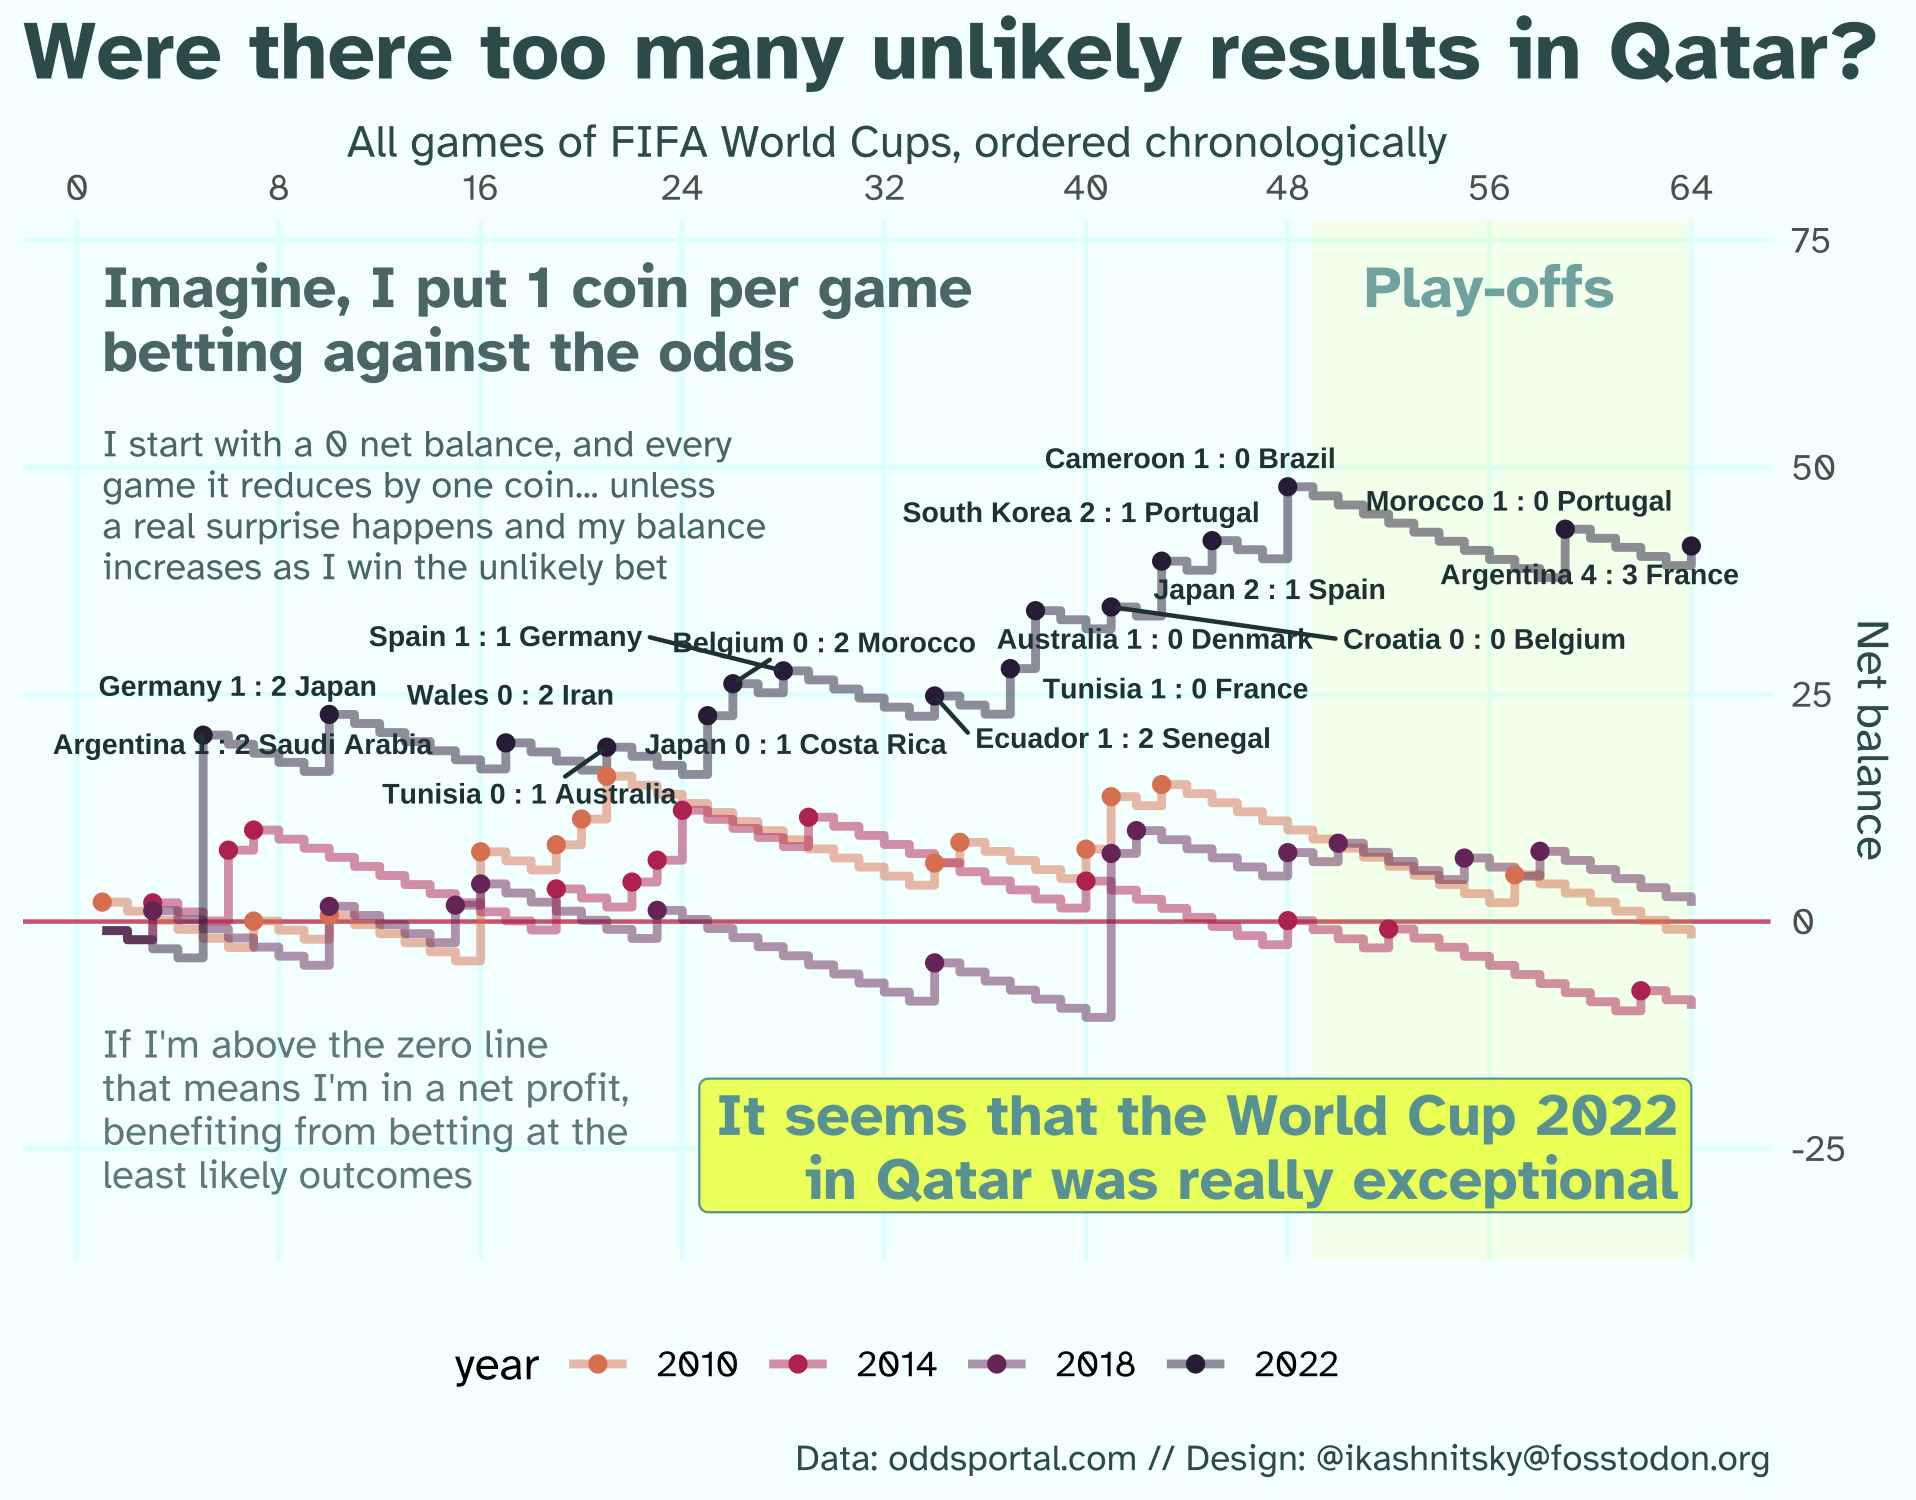 Were there too many unlikely results at the FIFA World Cup 2022 in Qatar? R-bloggers